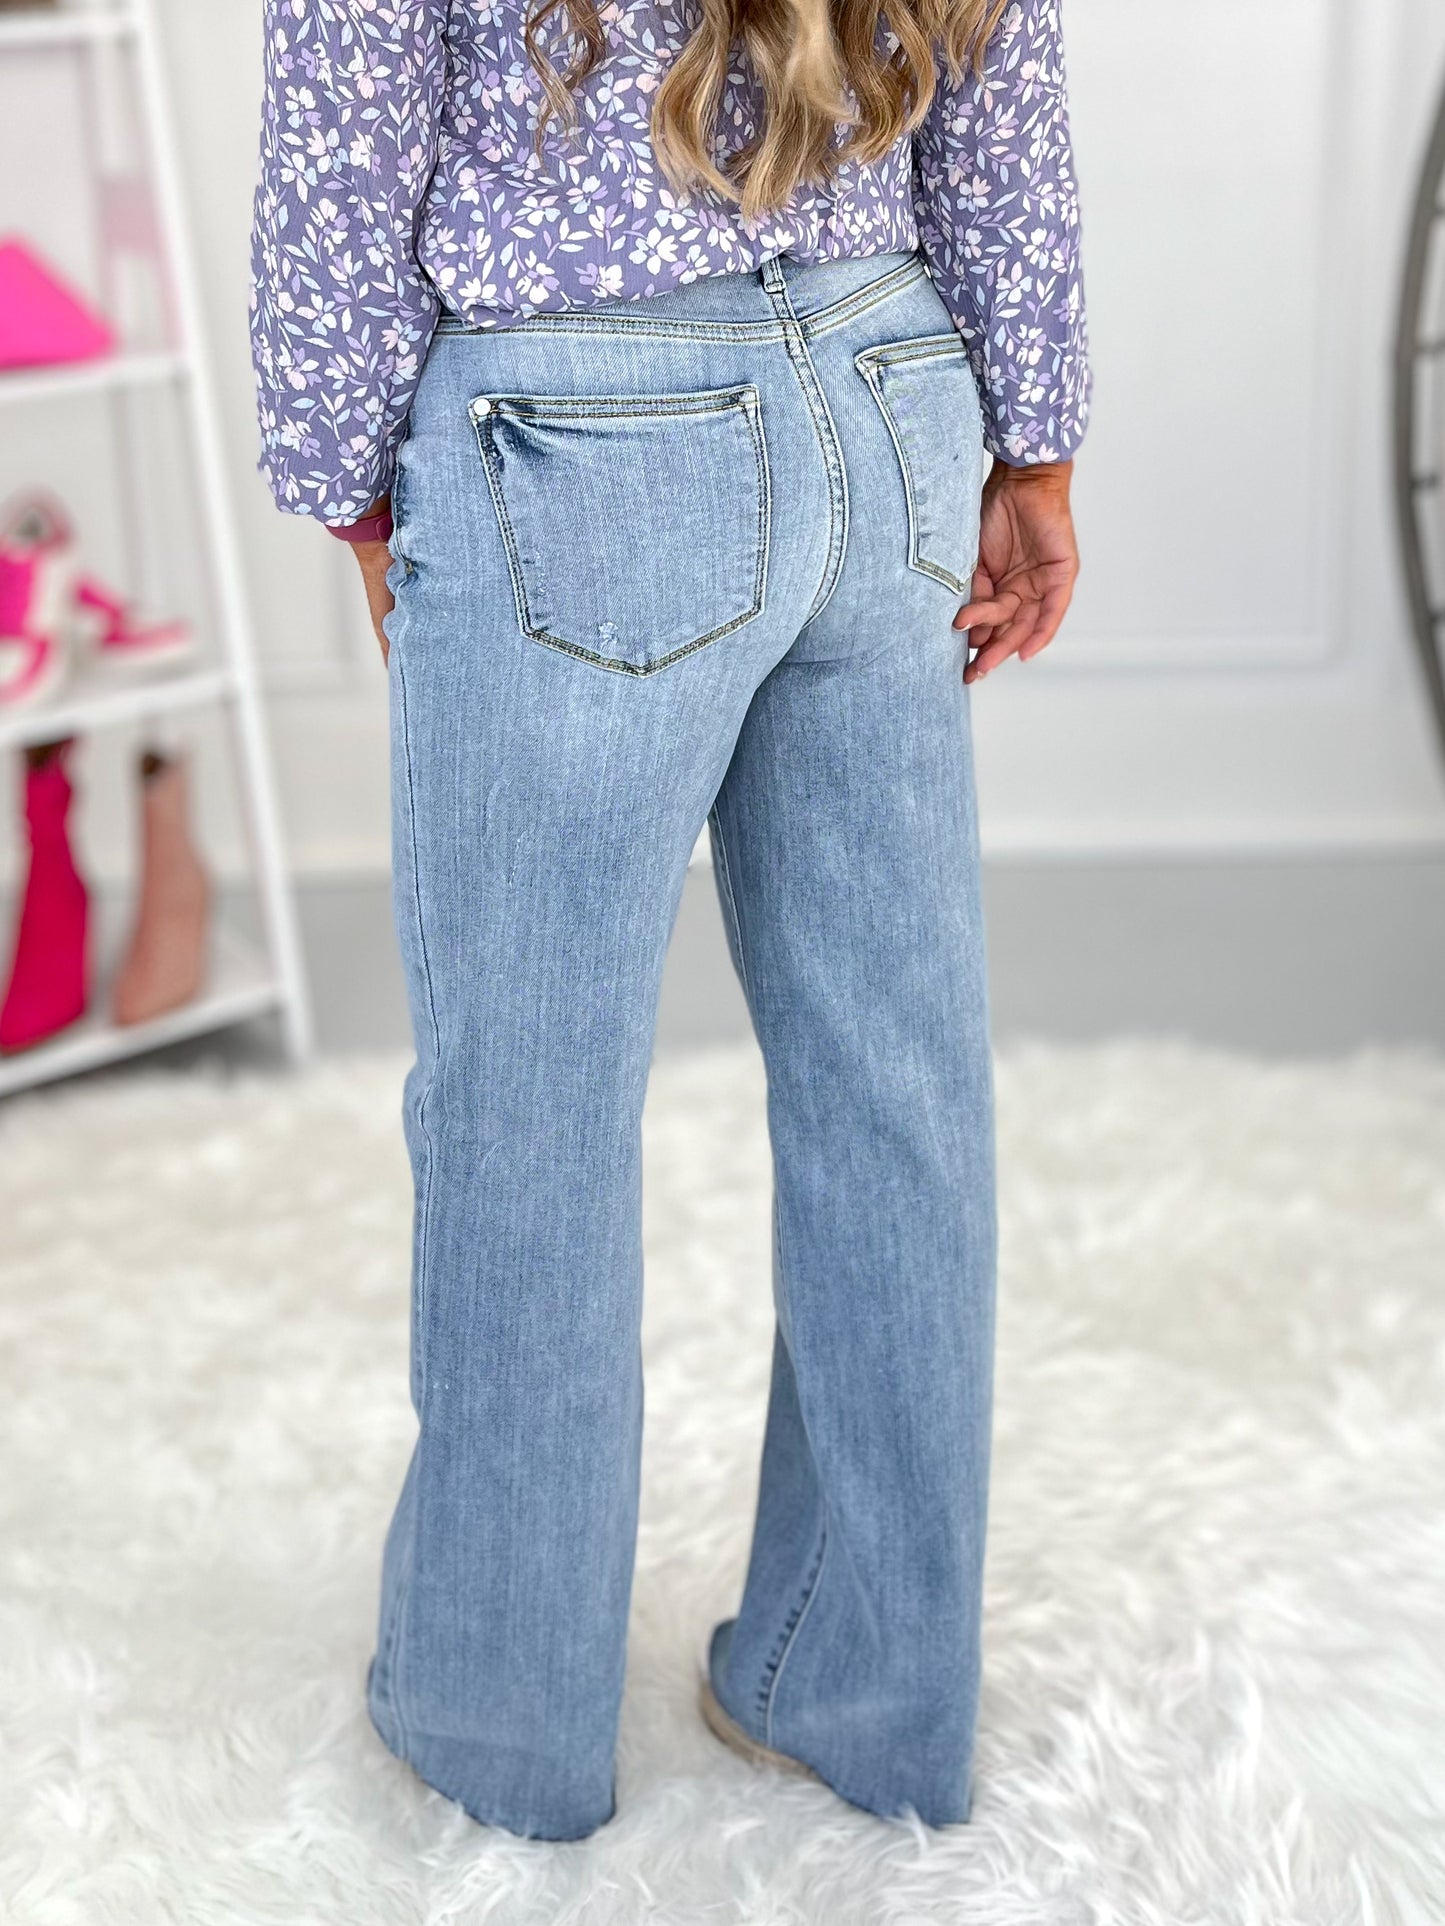 Low Rider - Judy Blue V Front Waistband Straight Fit Jeans